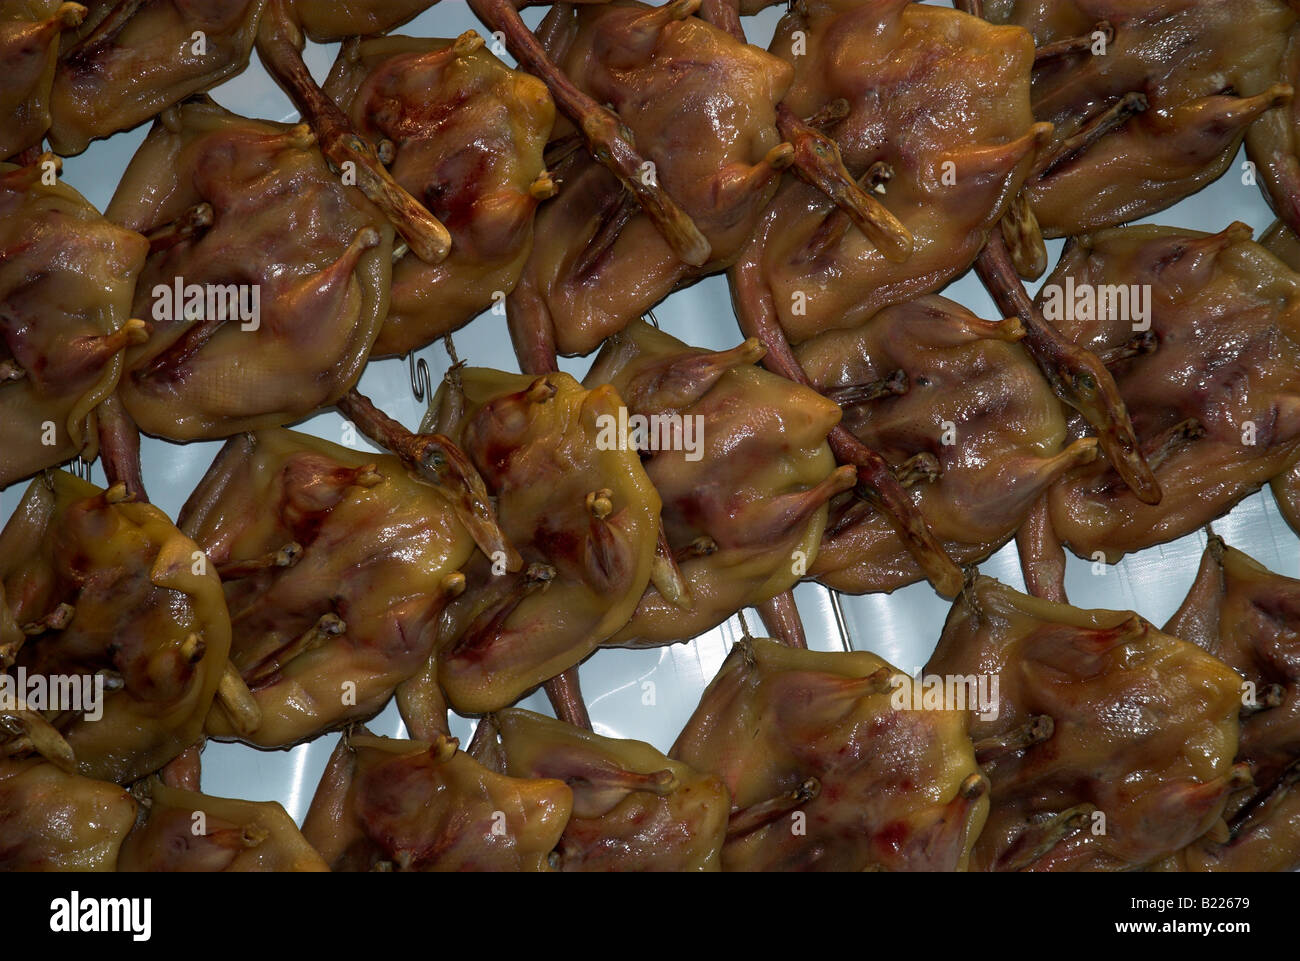 Basted chickens at Chinese New Year, Singapore Stock Photo